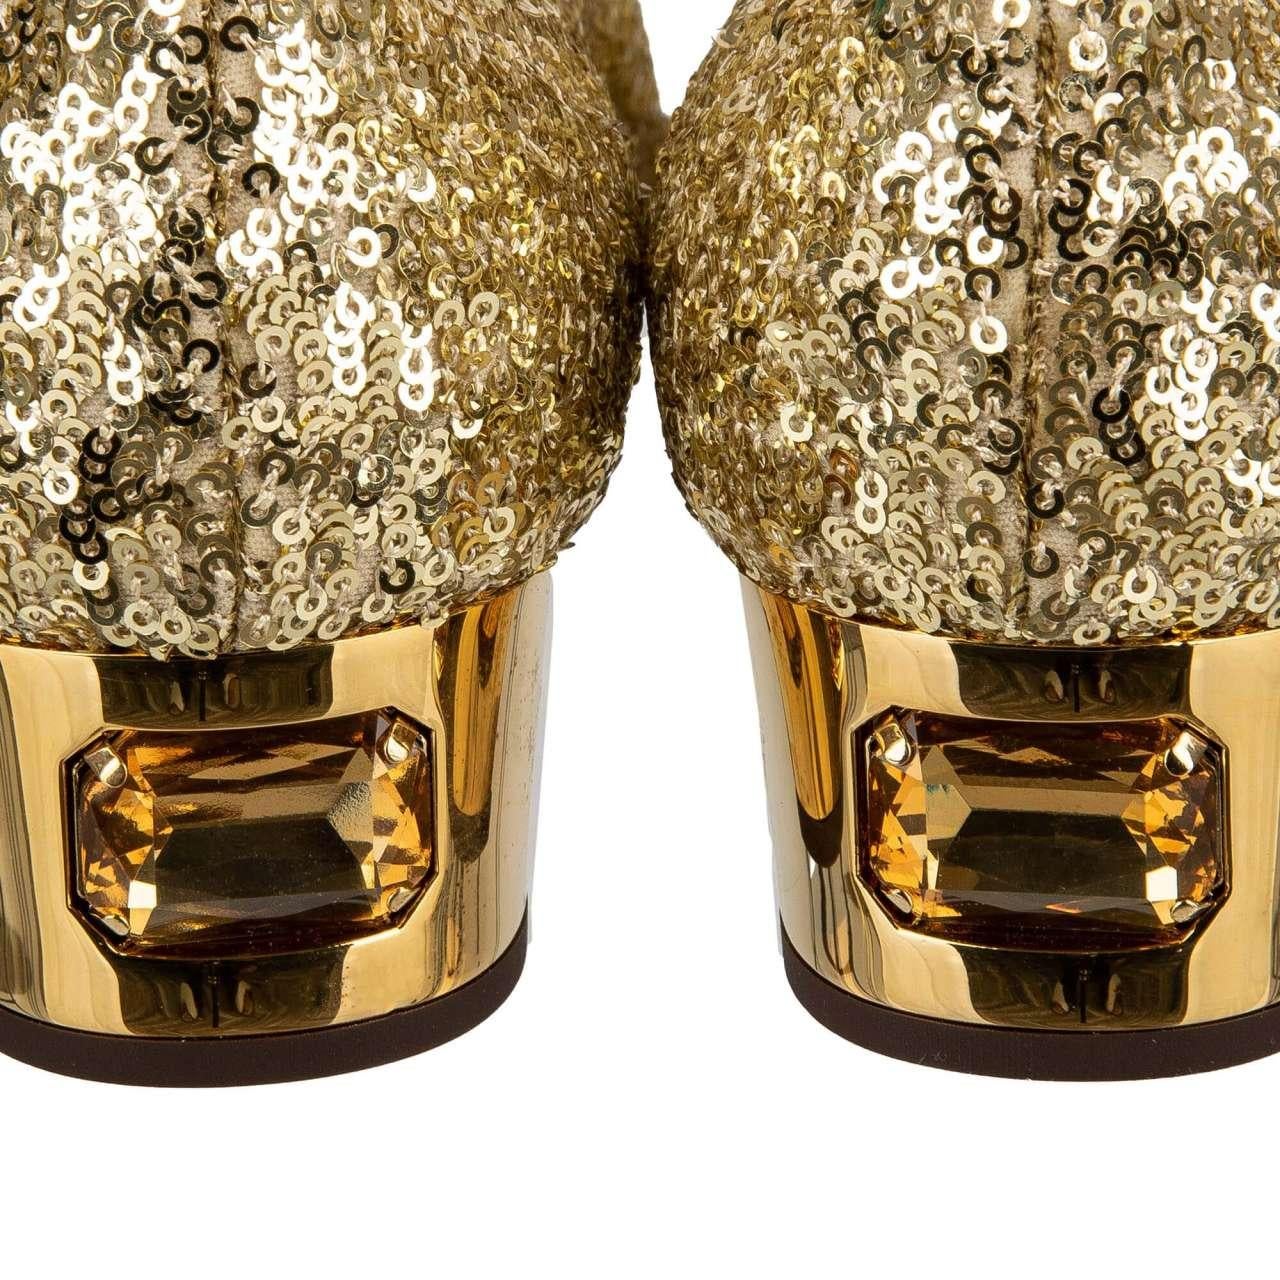 Dolce & Gabbana - Sequin Crystal Heels Mary Jane Pumps VALLY Gold 40 US 10 For Sale 3